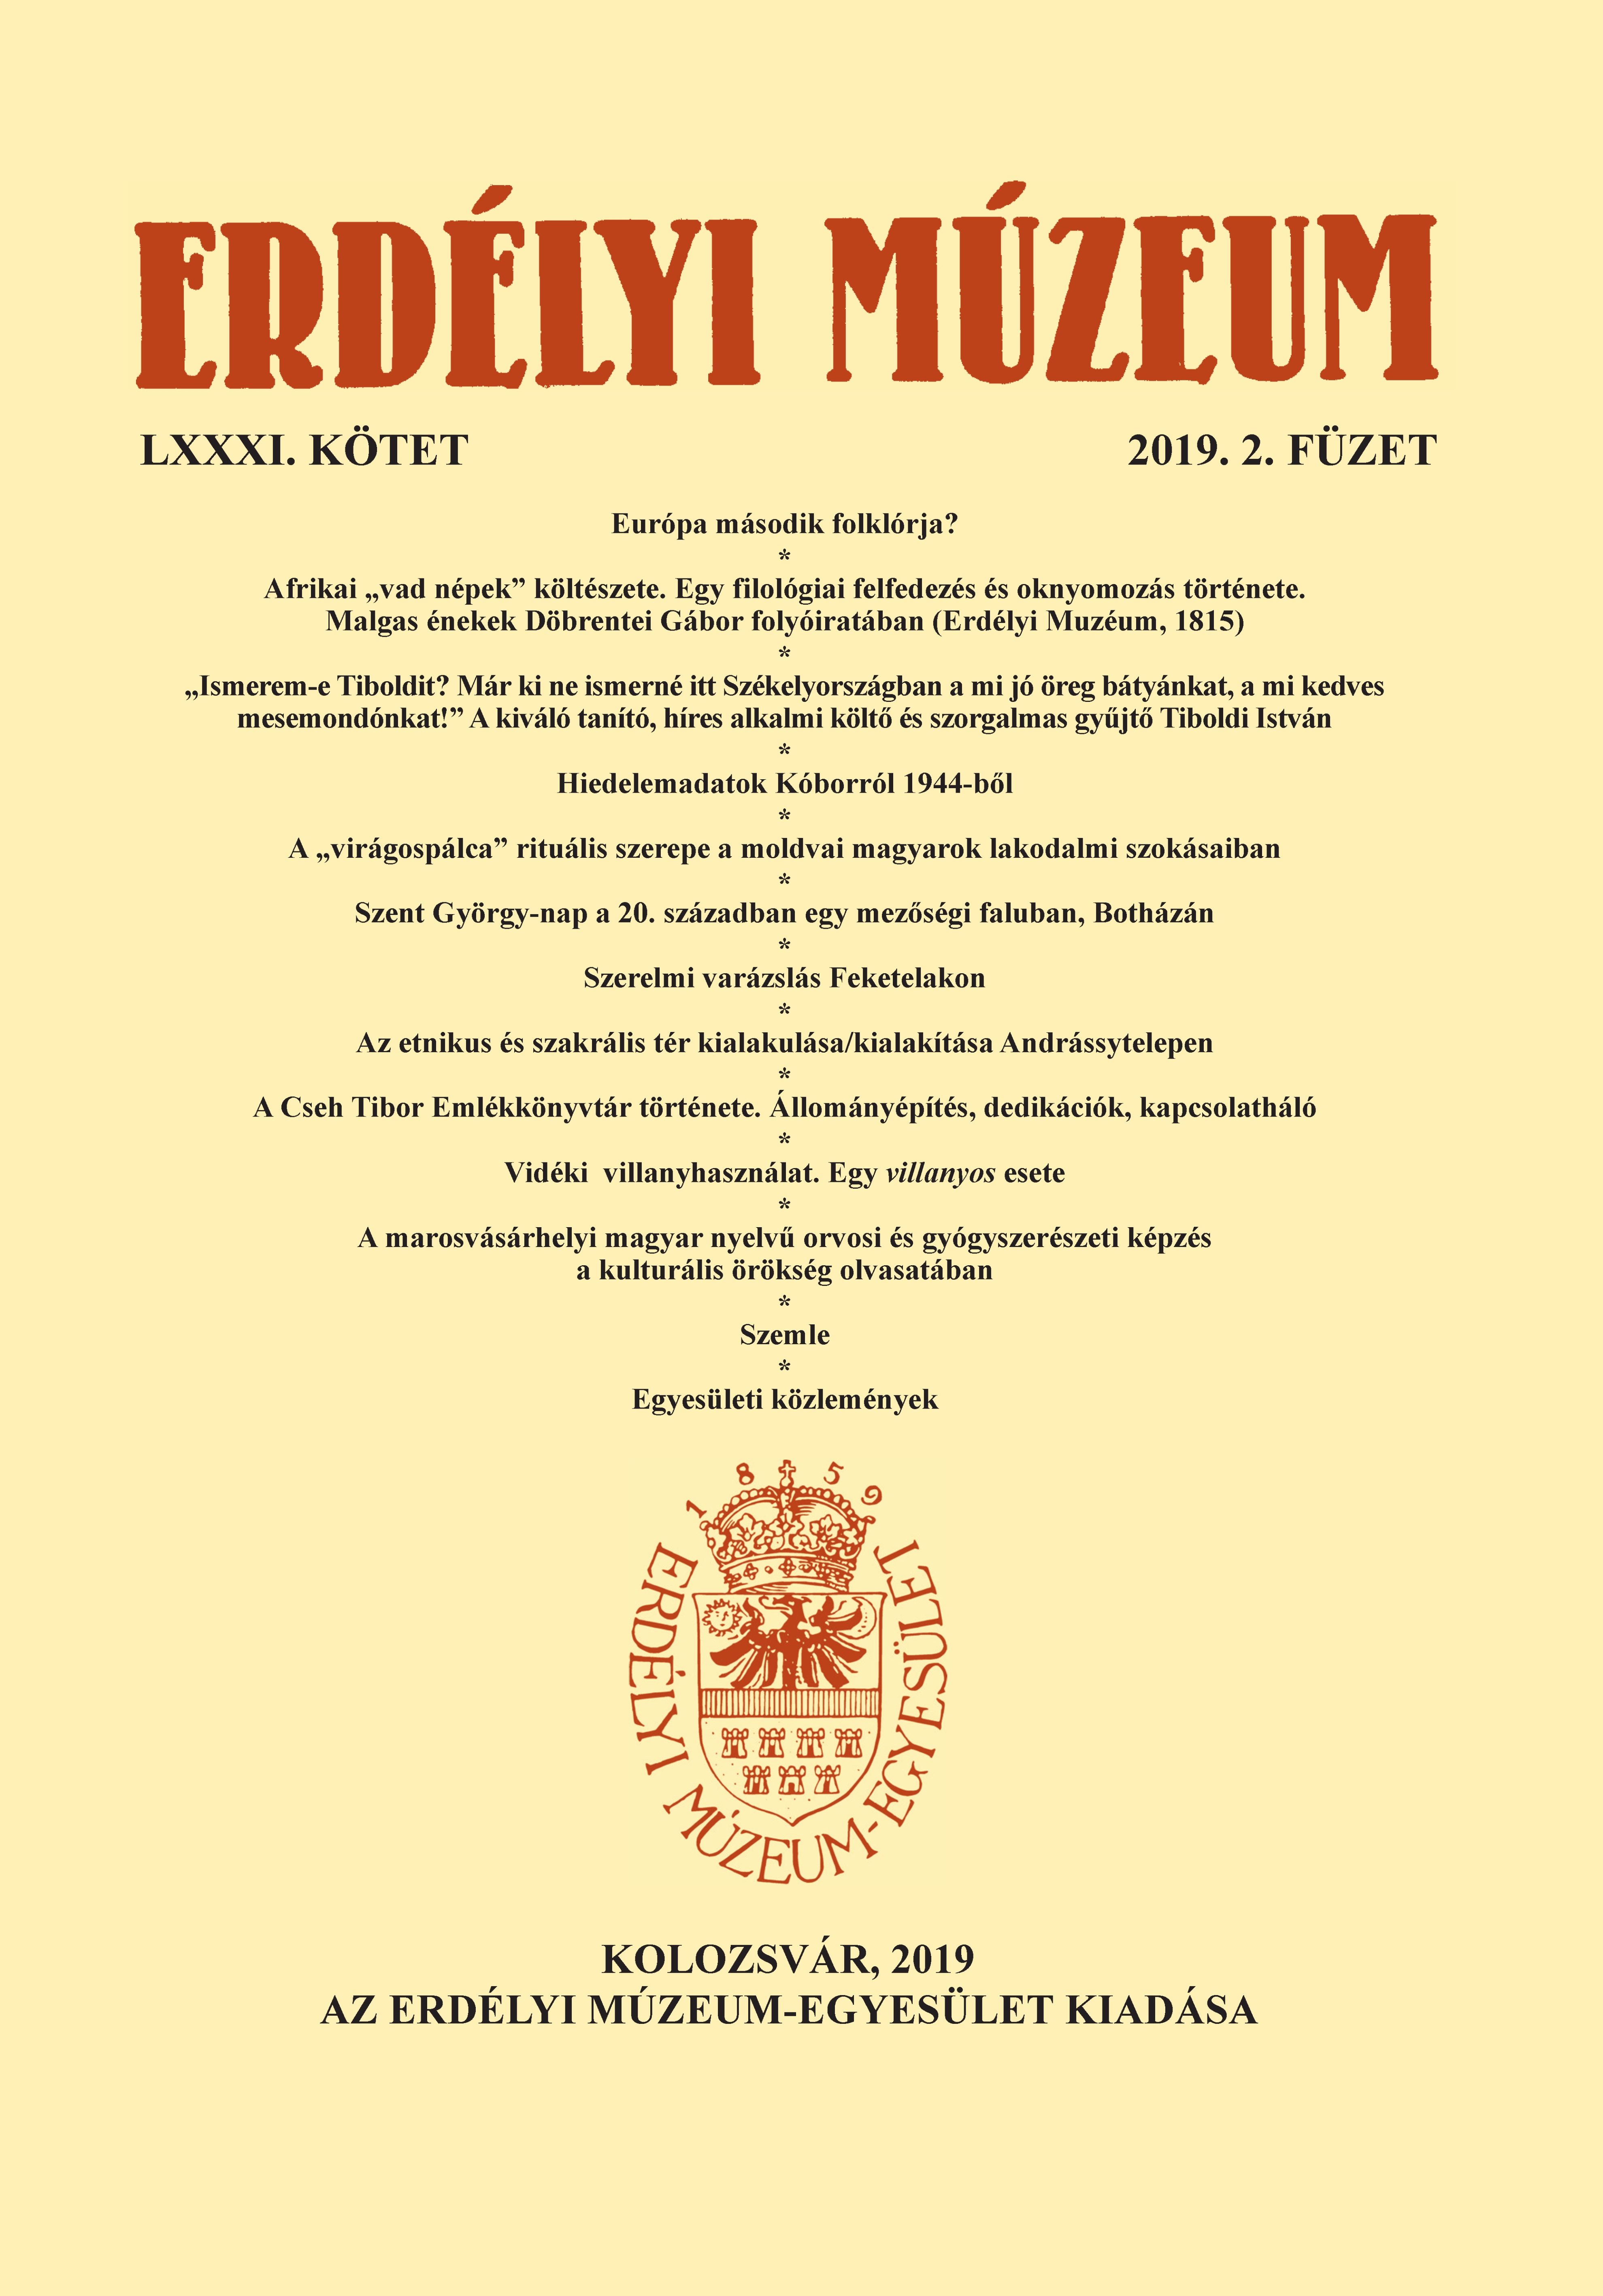 The Hungarian Medical Education in Târgu Mureș as Cultural Heritage Cover Image